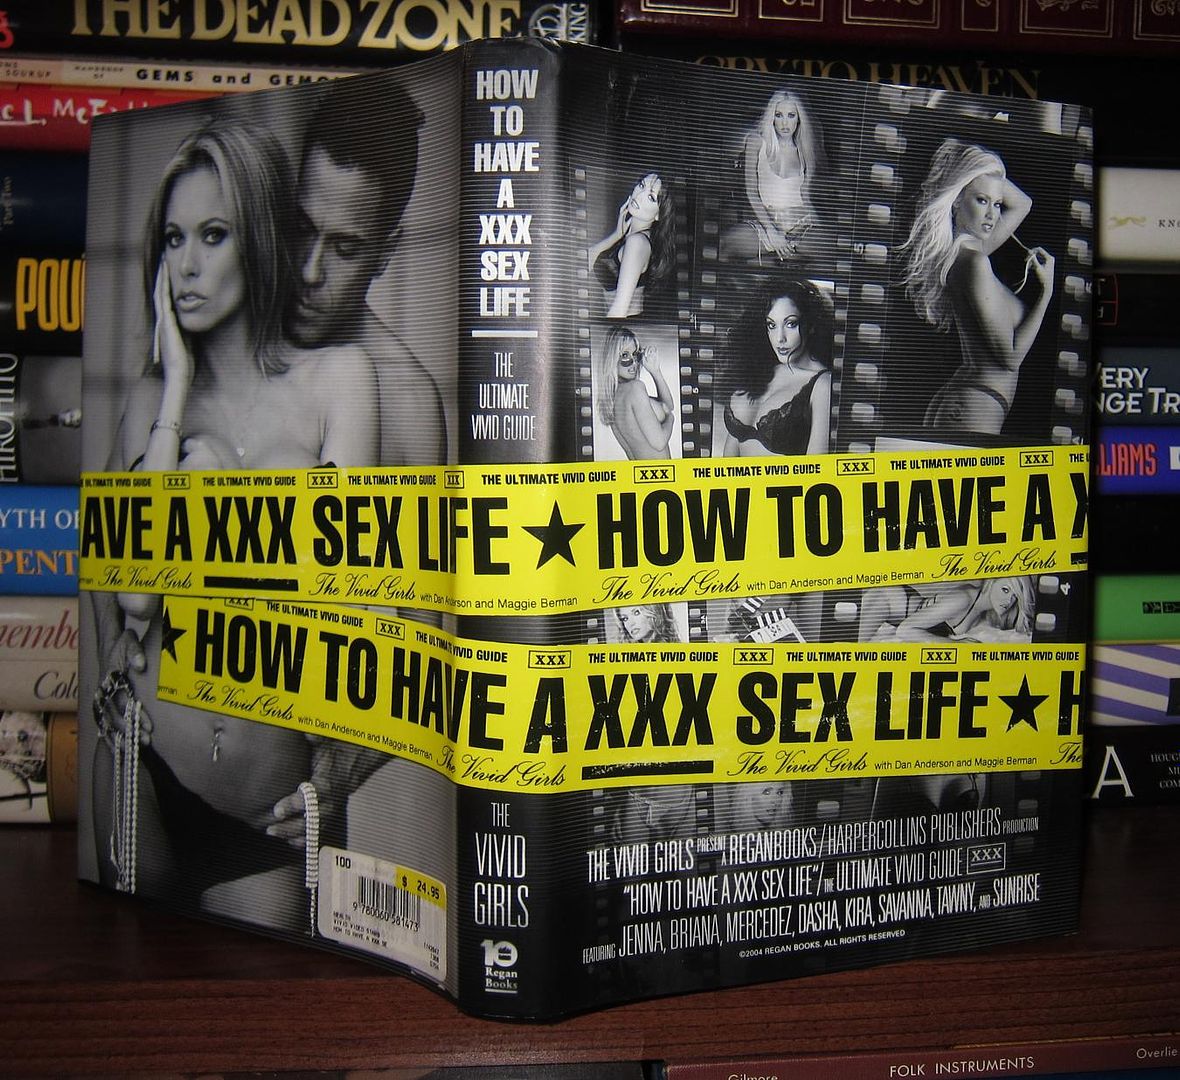 How to Have a XXX Sex Life: The Ultimate Vivid Guide Vivid Girls